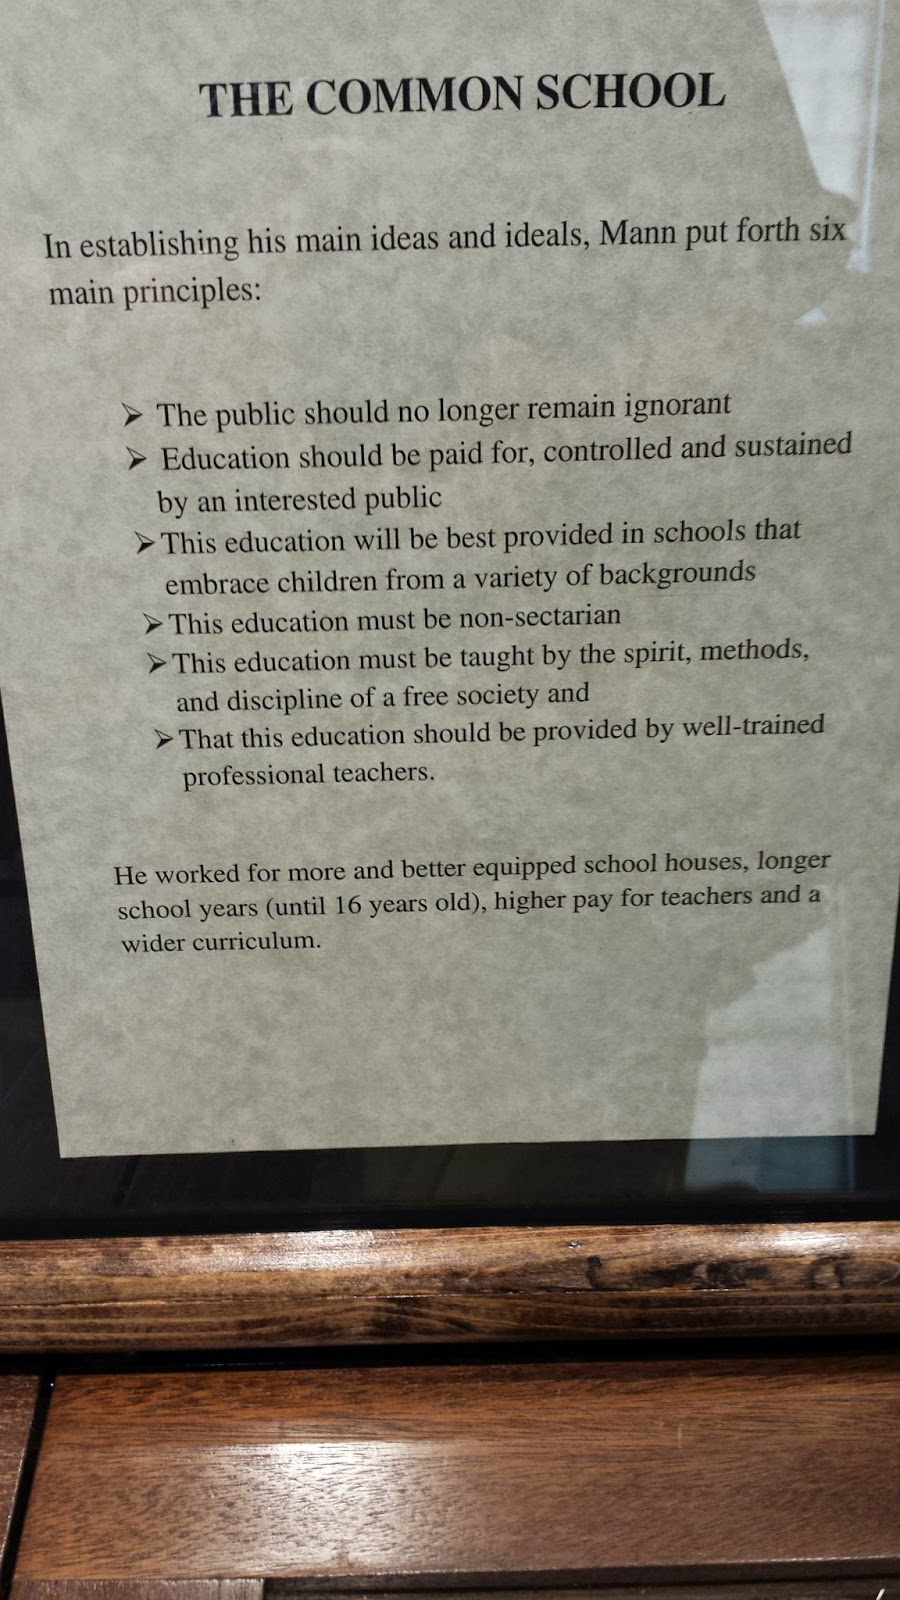 Horace Mann - principles of the 'Common School'